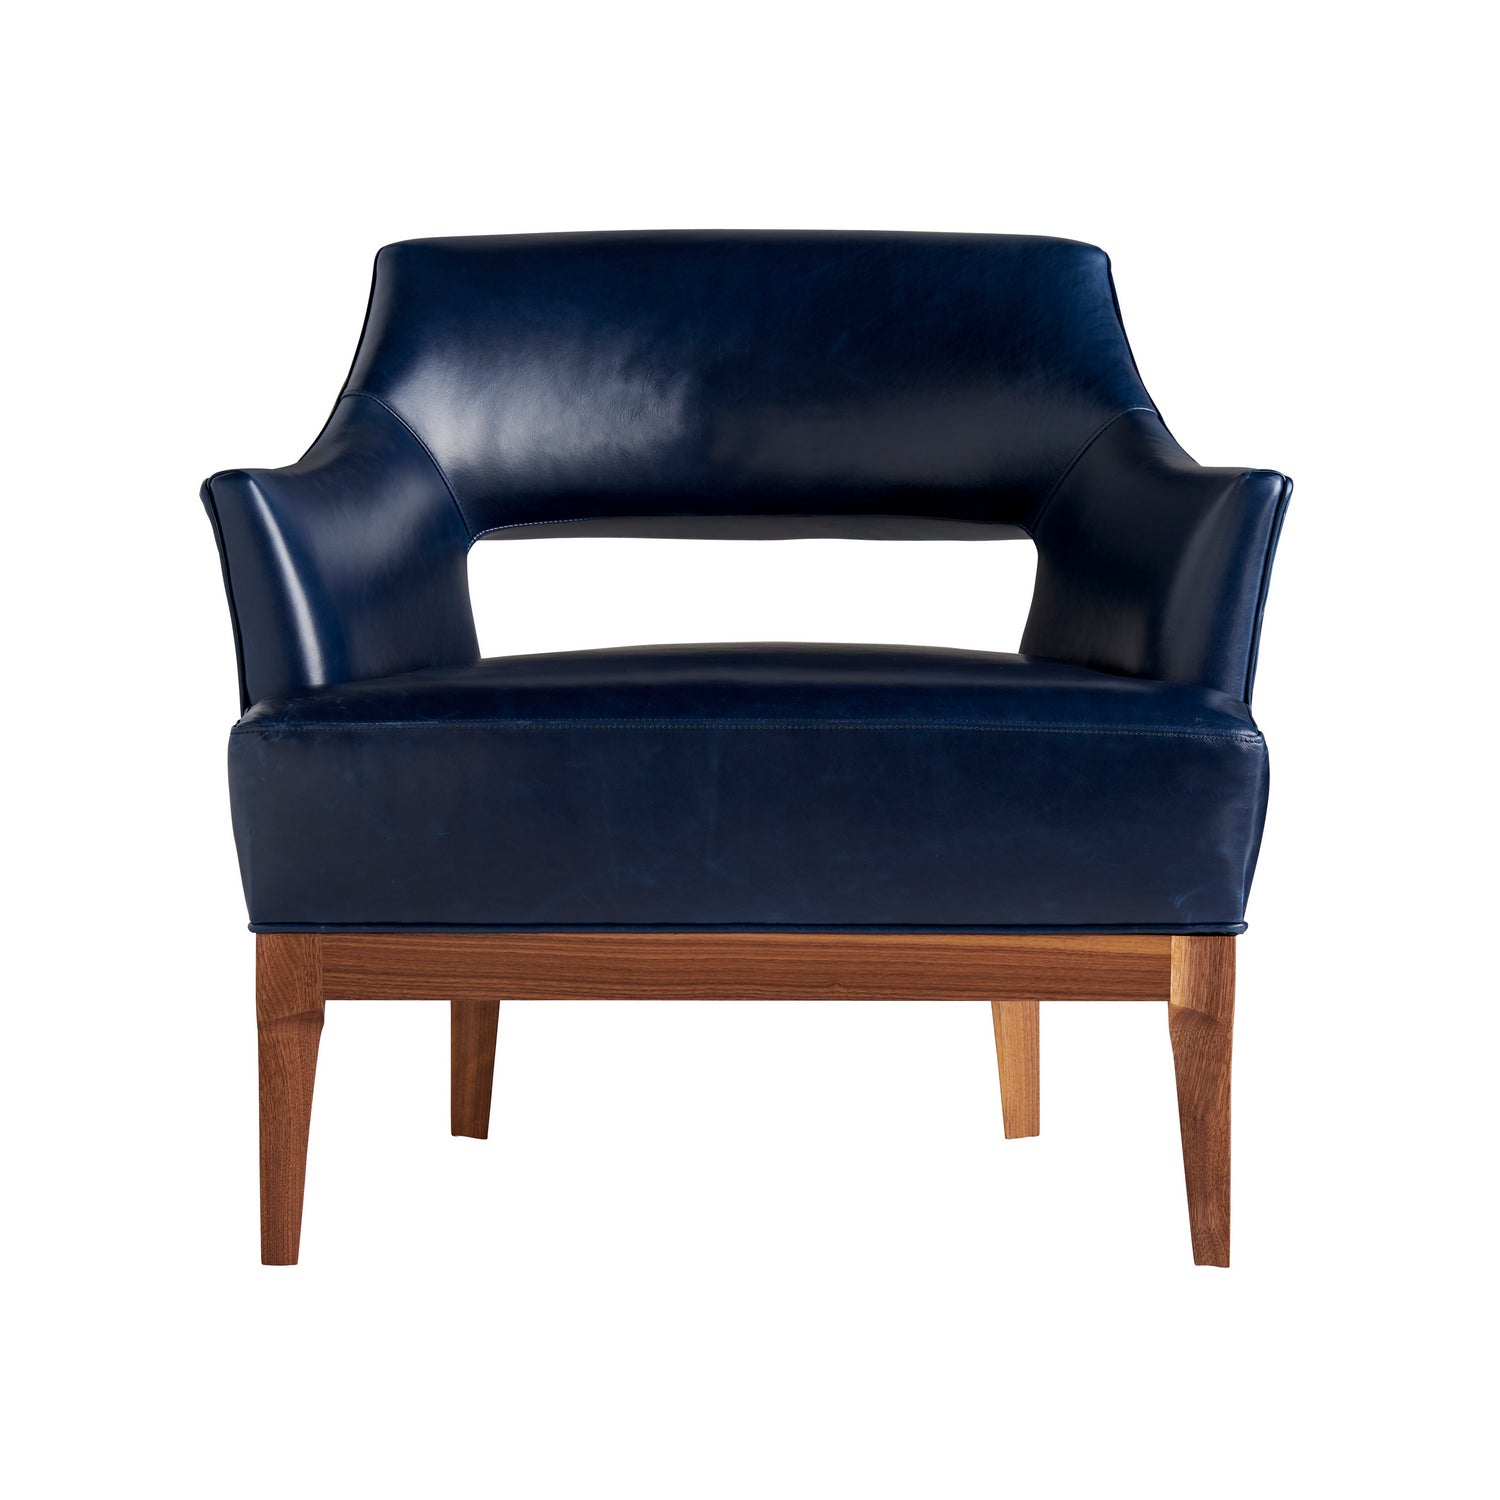 Upholstery - Chair from the Laurette collection